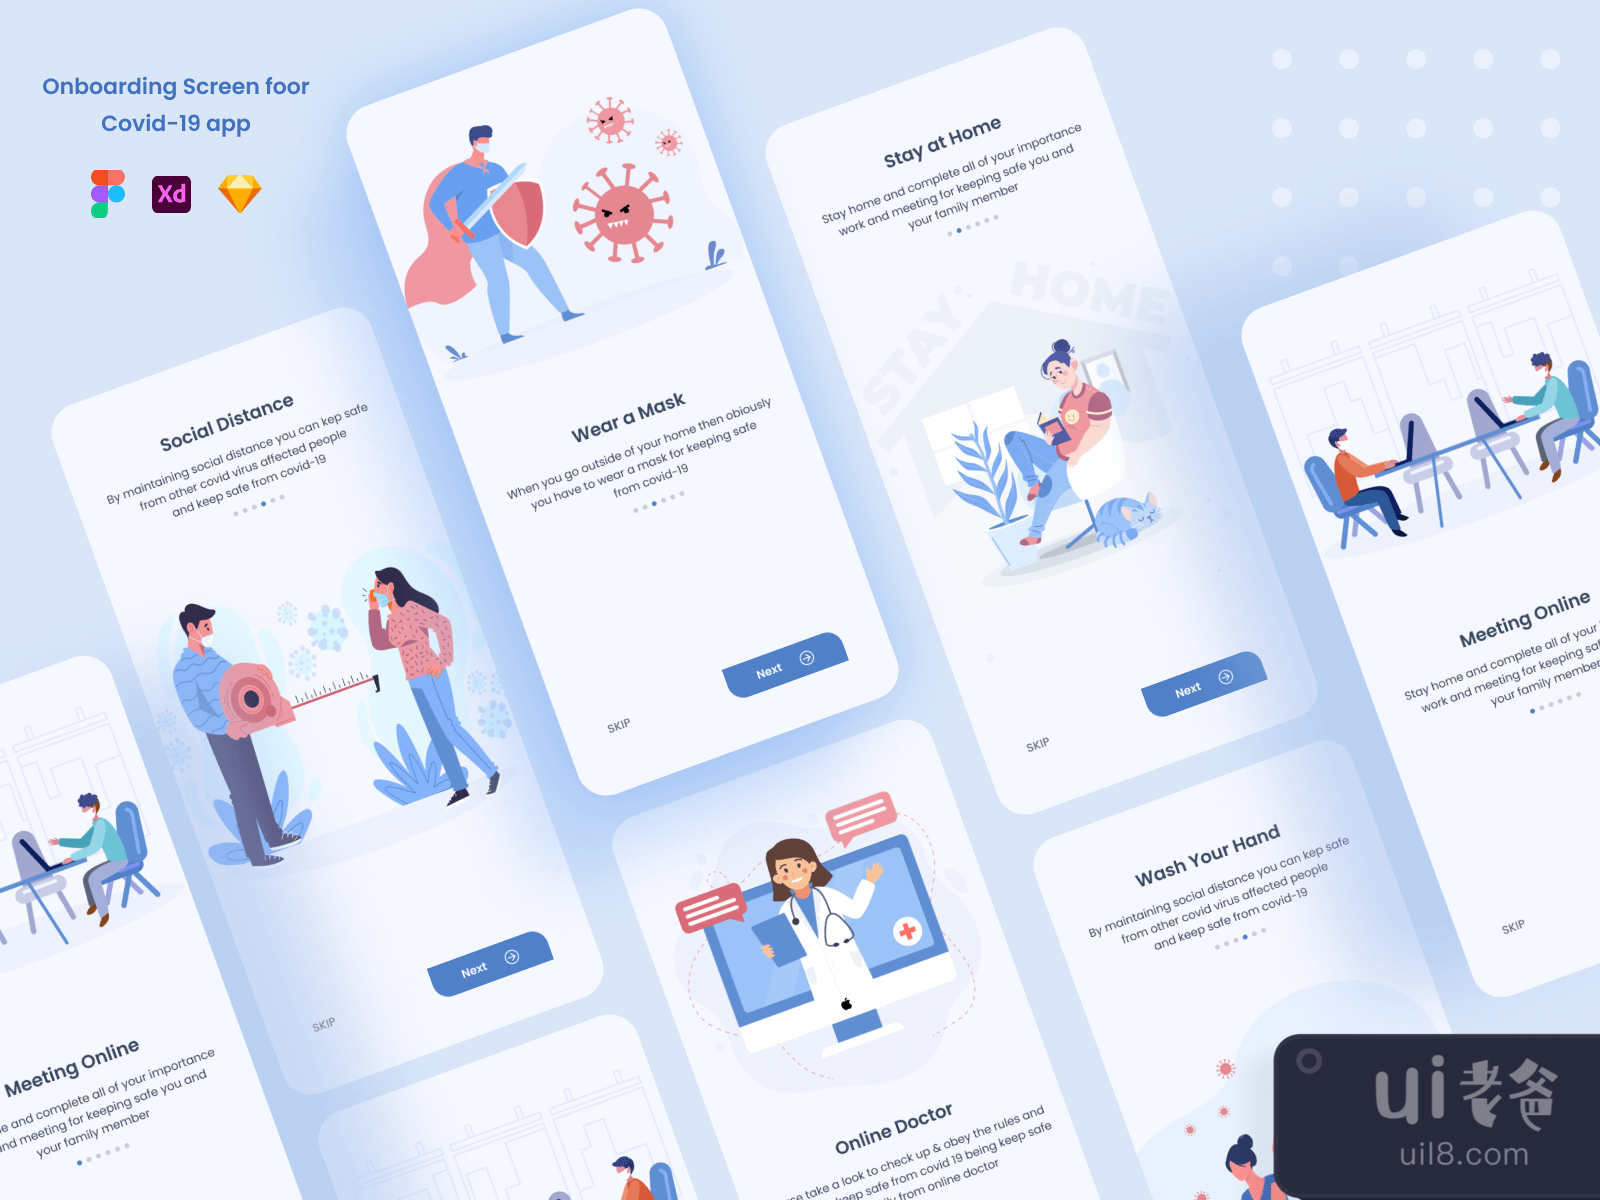 Onboarding Screen for COVID-19 App for Figma and Adobe XD No 2